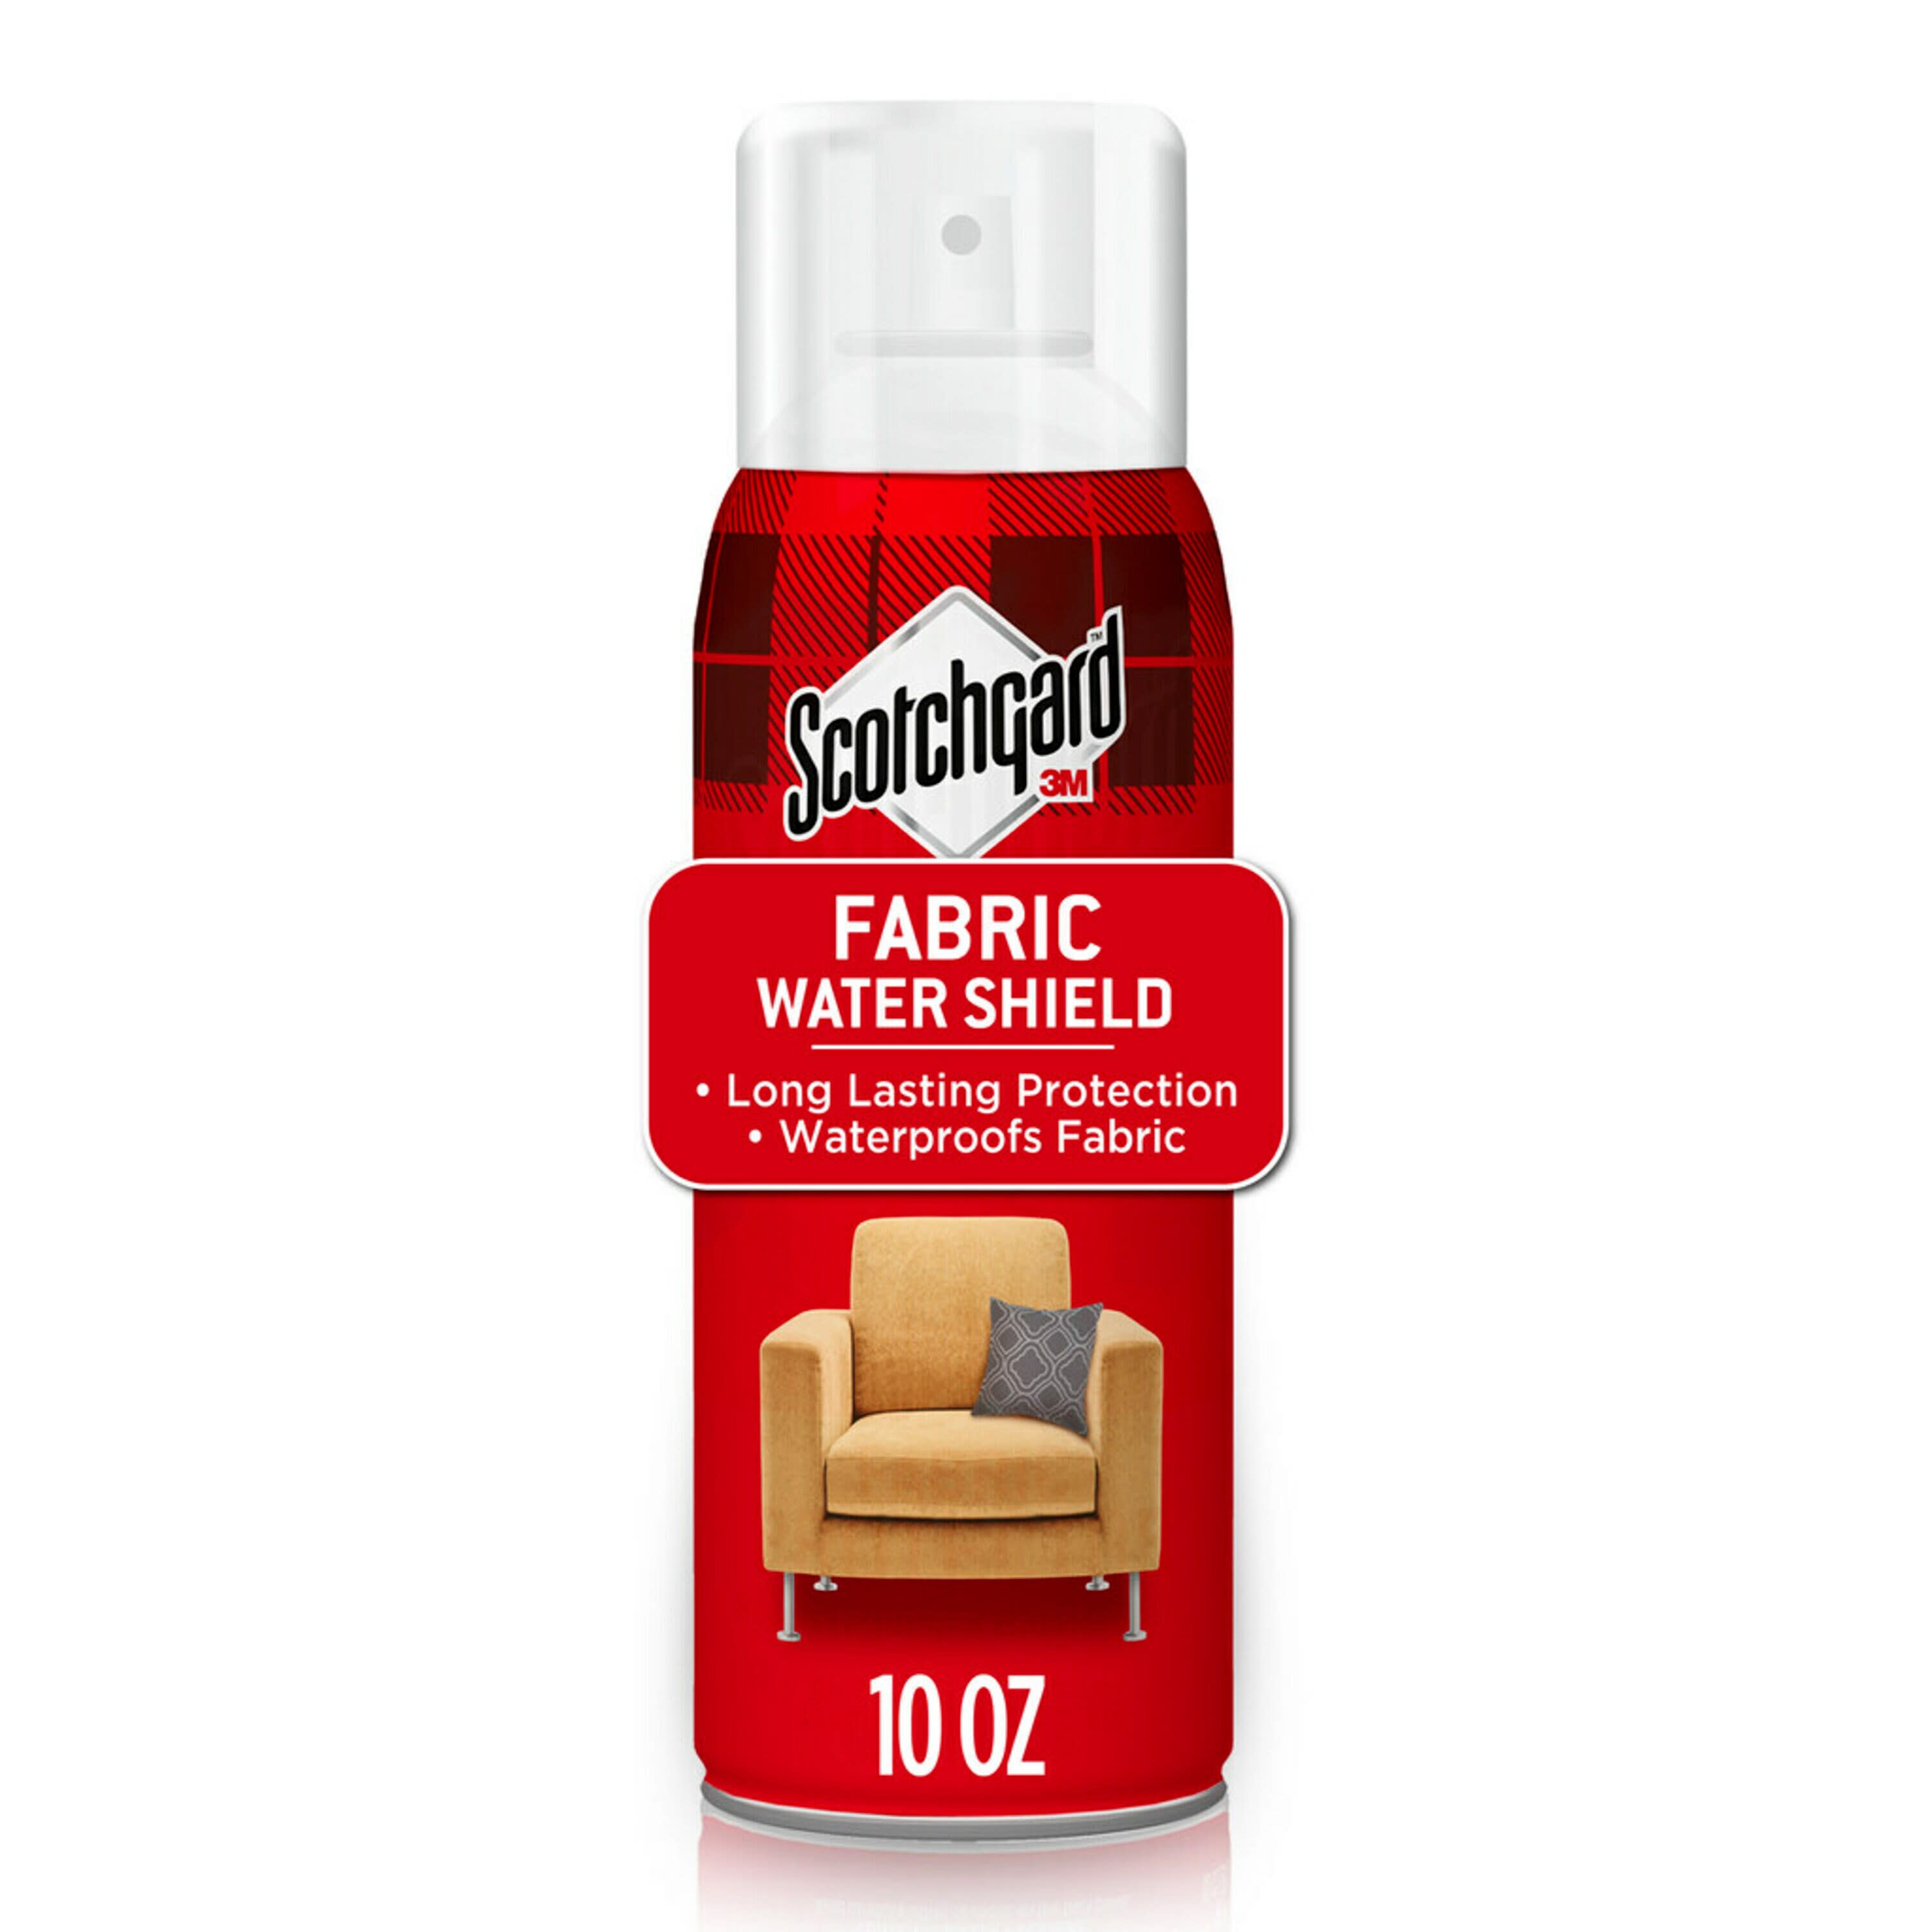 Scotchgard Fabric Water Shield Water Repellent Spray, One 10 oz Can - image 3 of 13